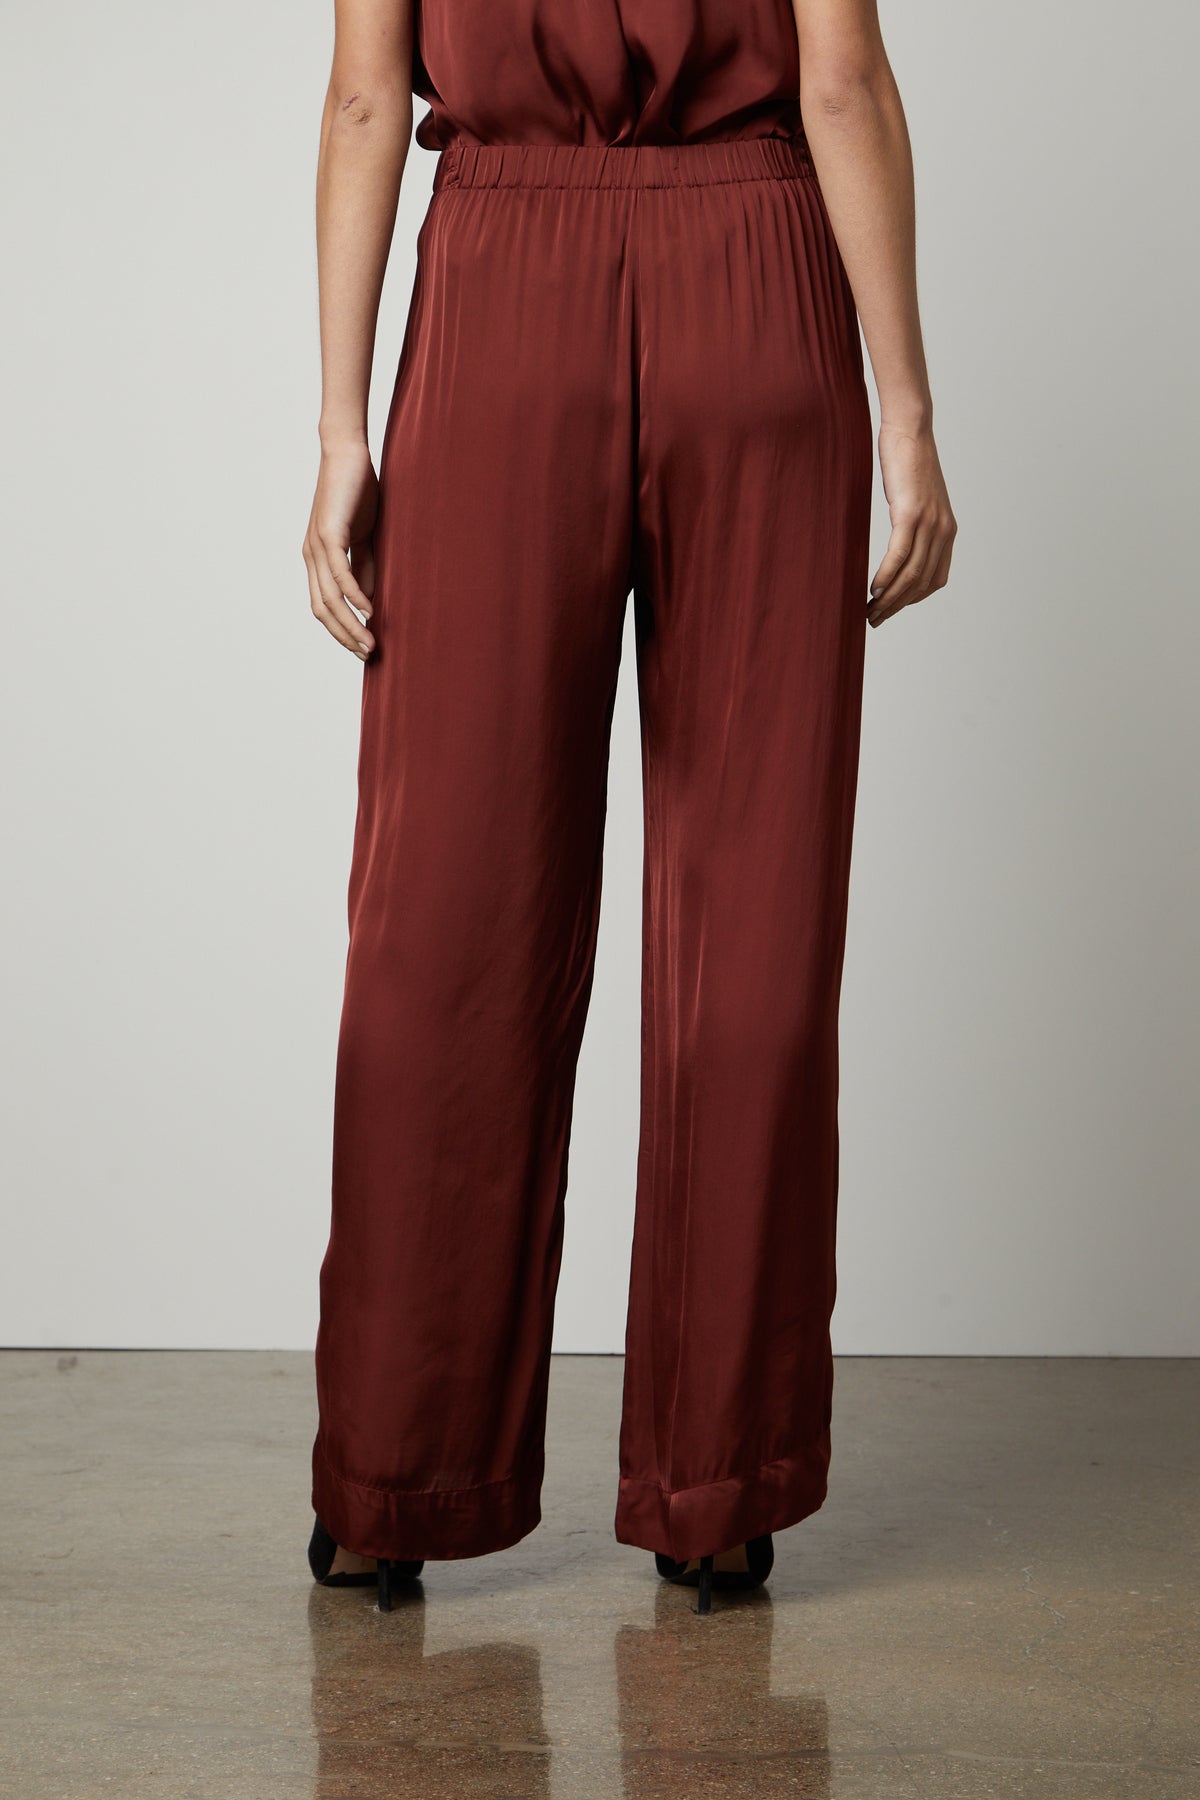 The woman is wearing a Velvet by Graham & Spencer burgundy jumpsuit with elastic waistline and slash pockets.-35655937851585